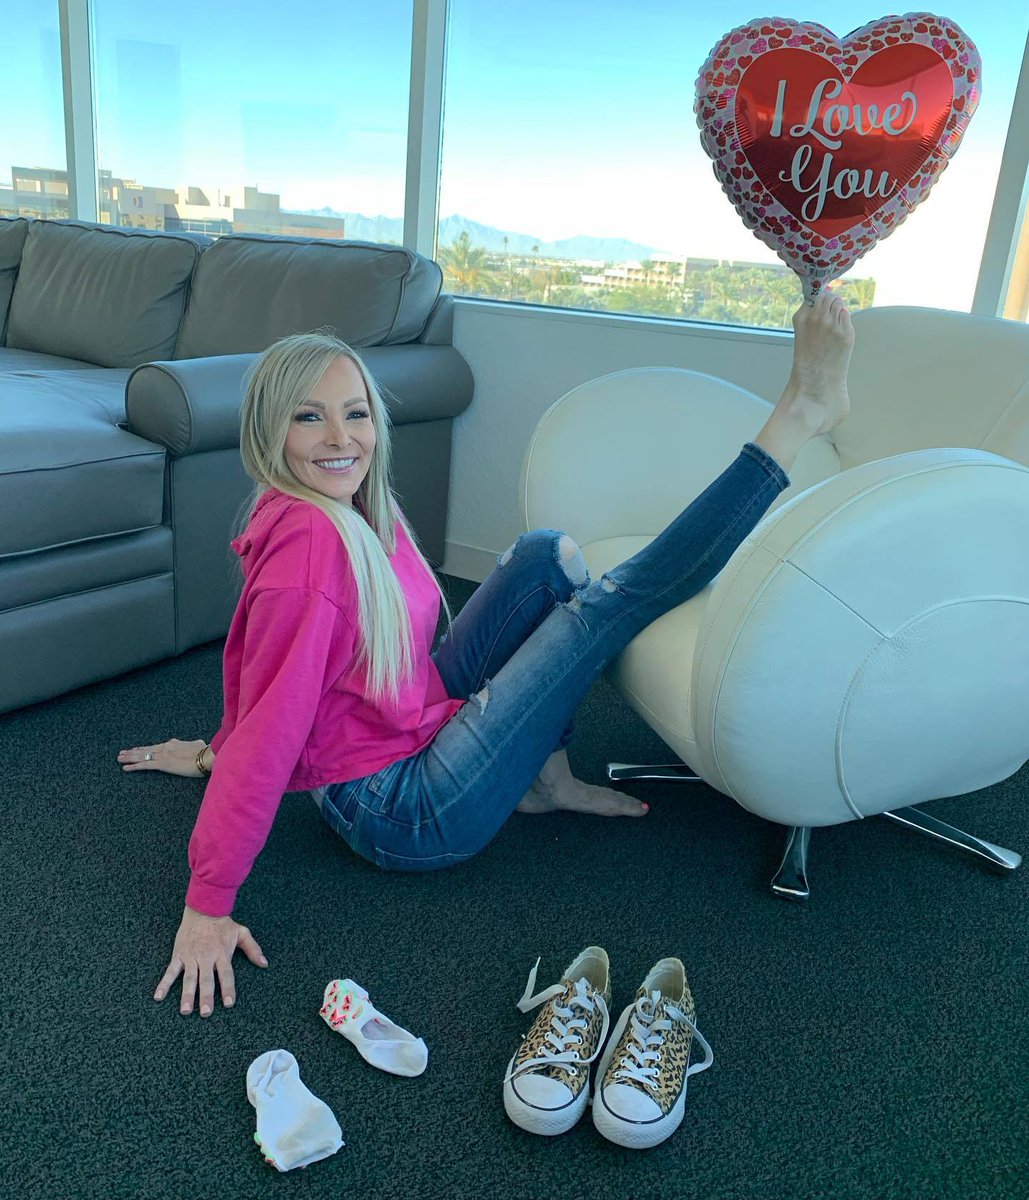 Celebrities&Balloons on X: The American TV host Kyle Unfug♥️🎈#kyleunfug  #americangirl #blondegirl #casualoutfit #converse #shoesoff #sockslover  #feetloversonly #iloveyou #balloons t.coc627XsS2e9  X